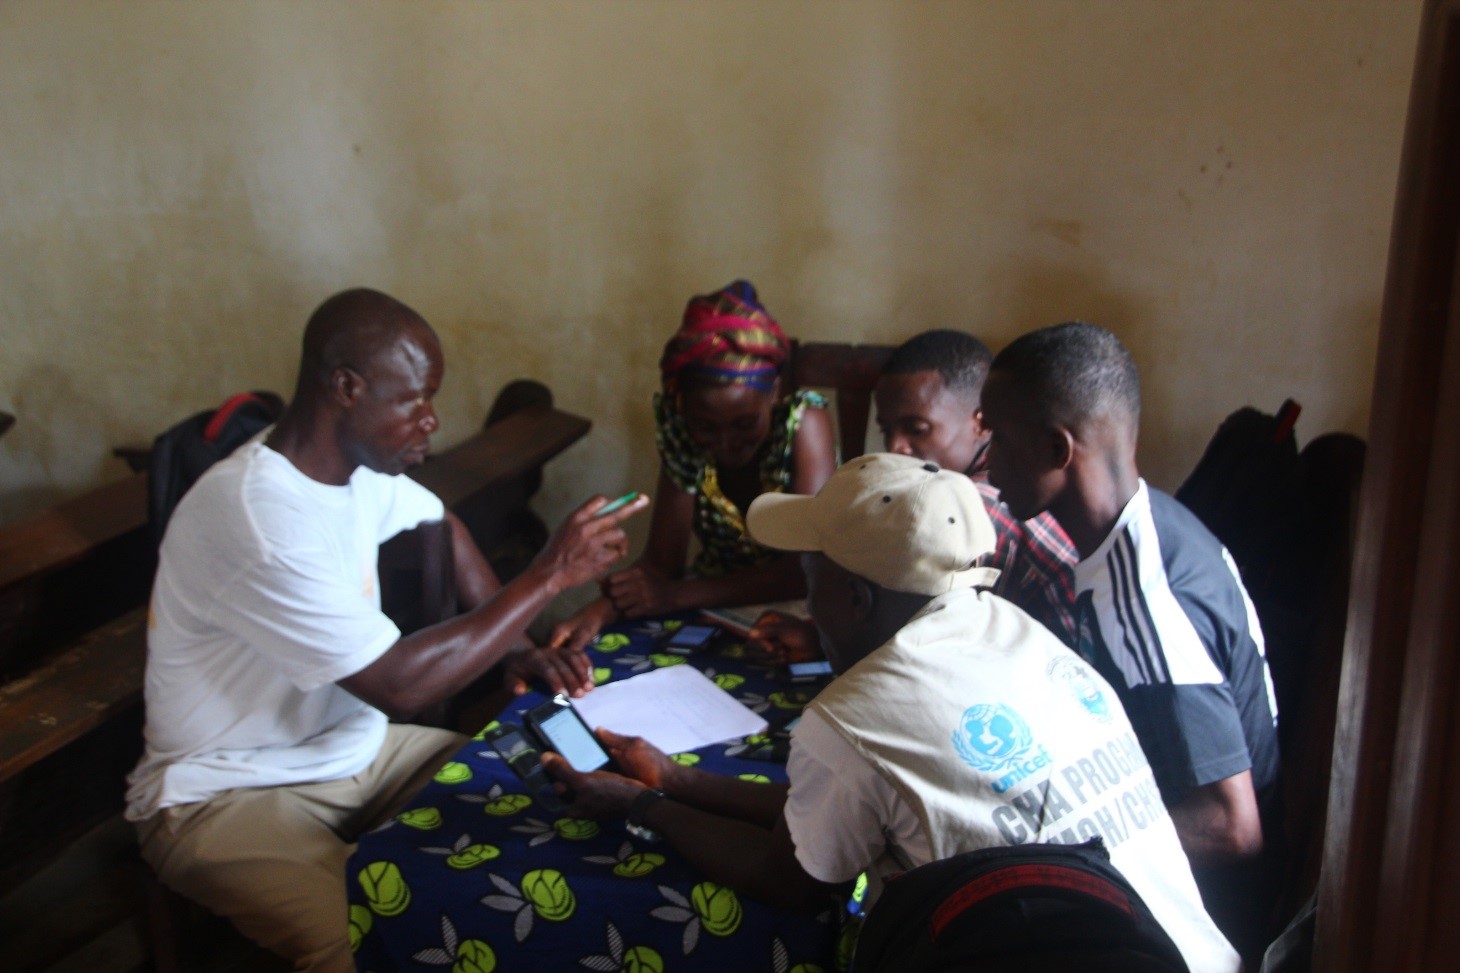 Training community health workers to use smartphones for data collection